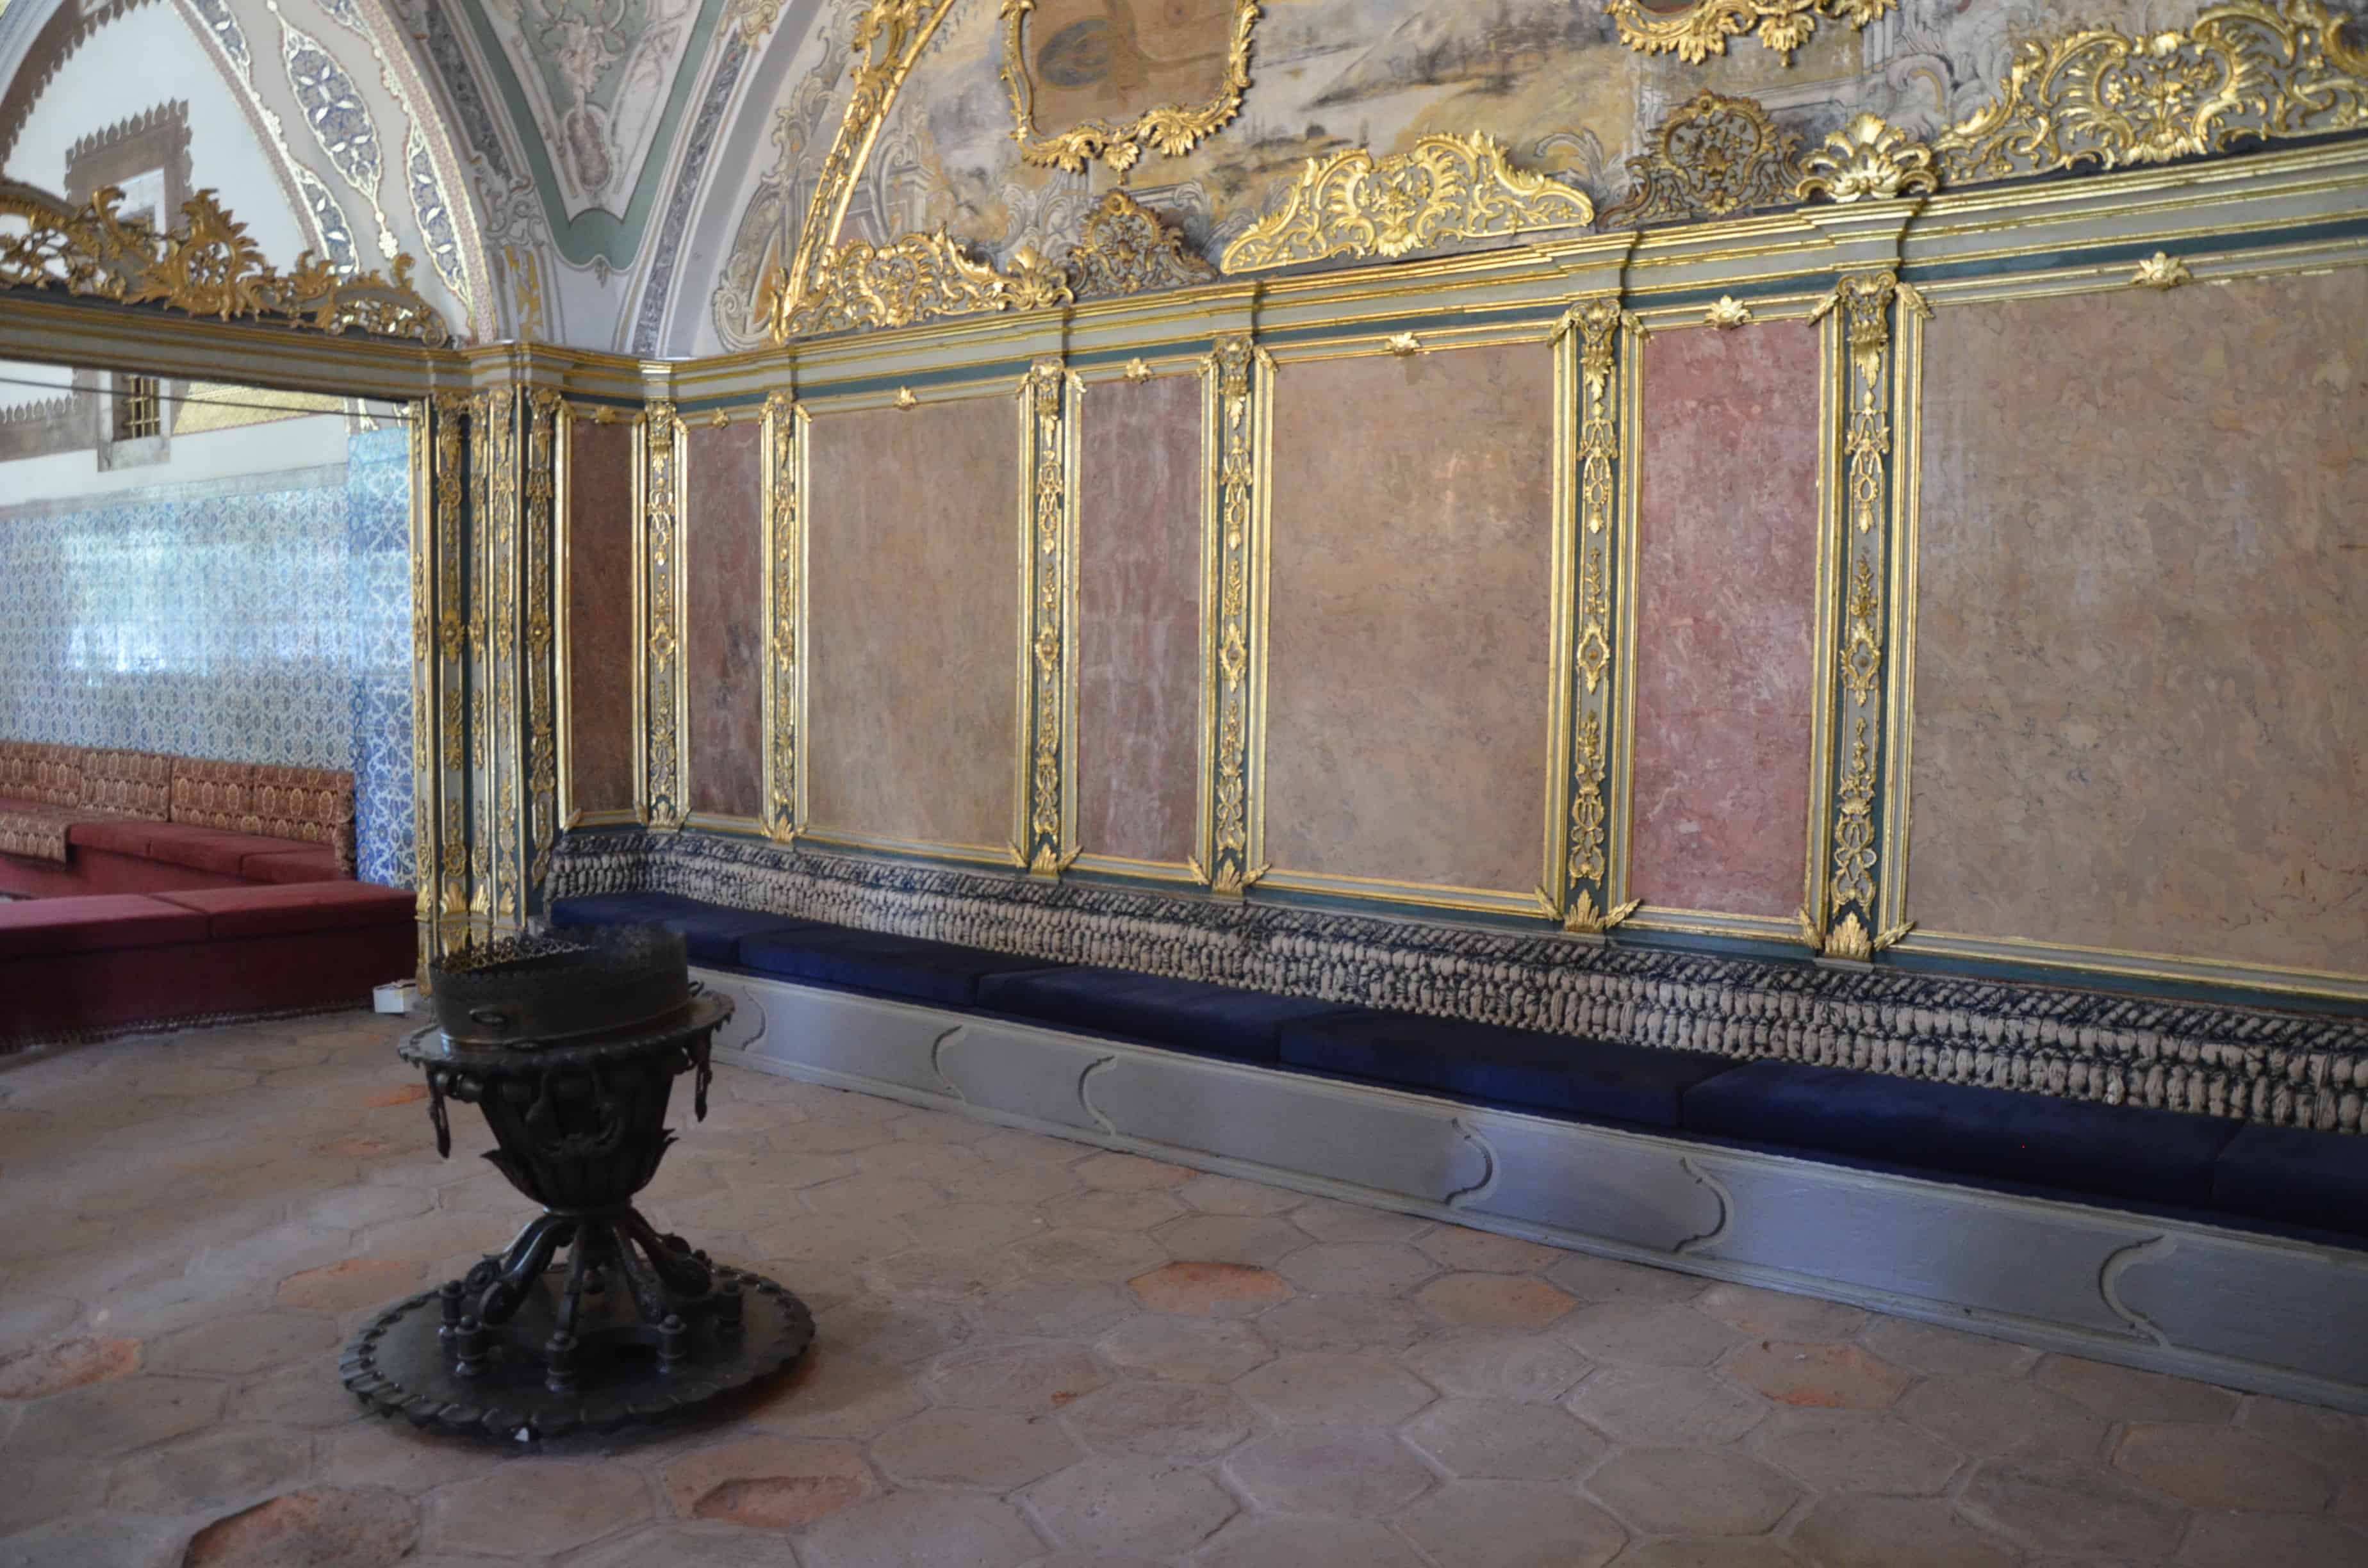 Second chamber at the Imperial Council at Topkapi Palace in Istanbul, Turkey